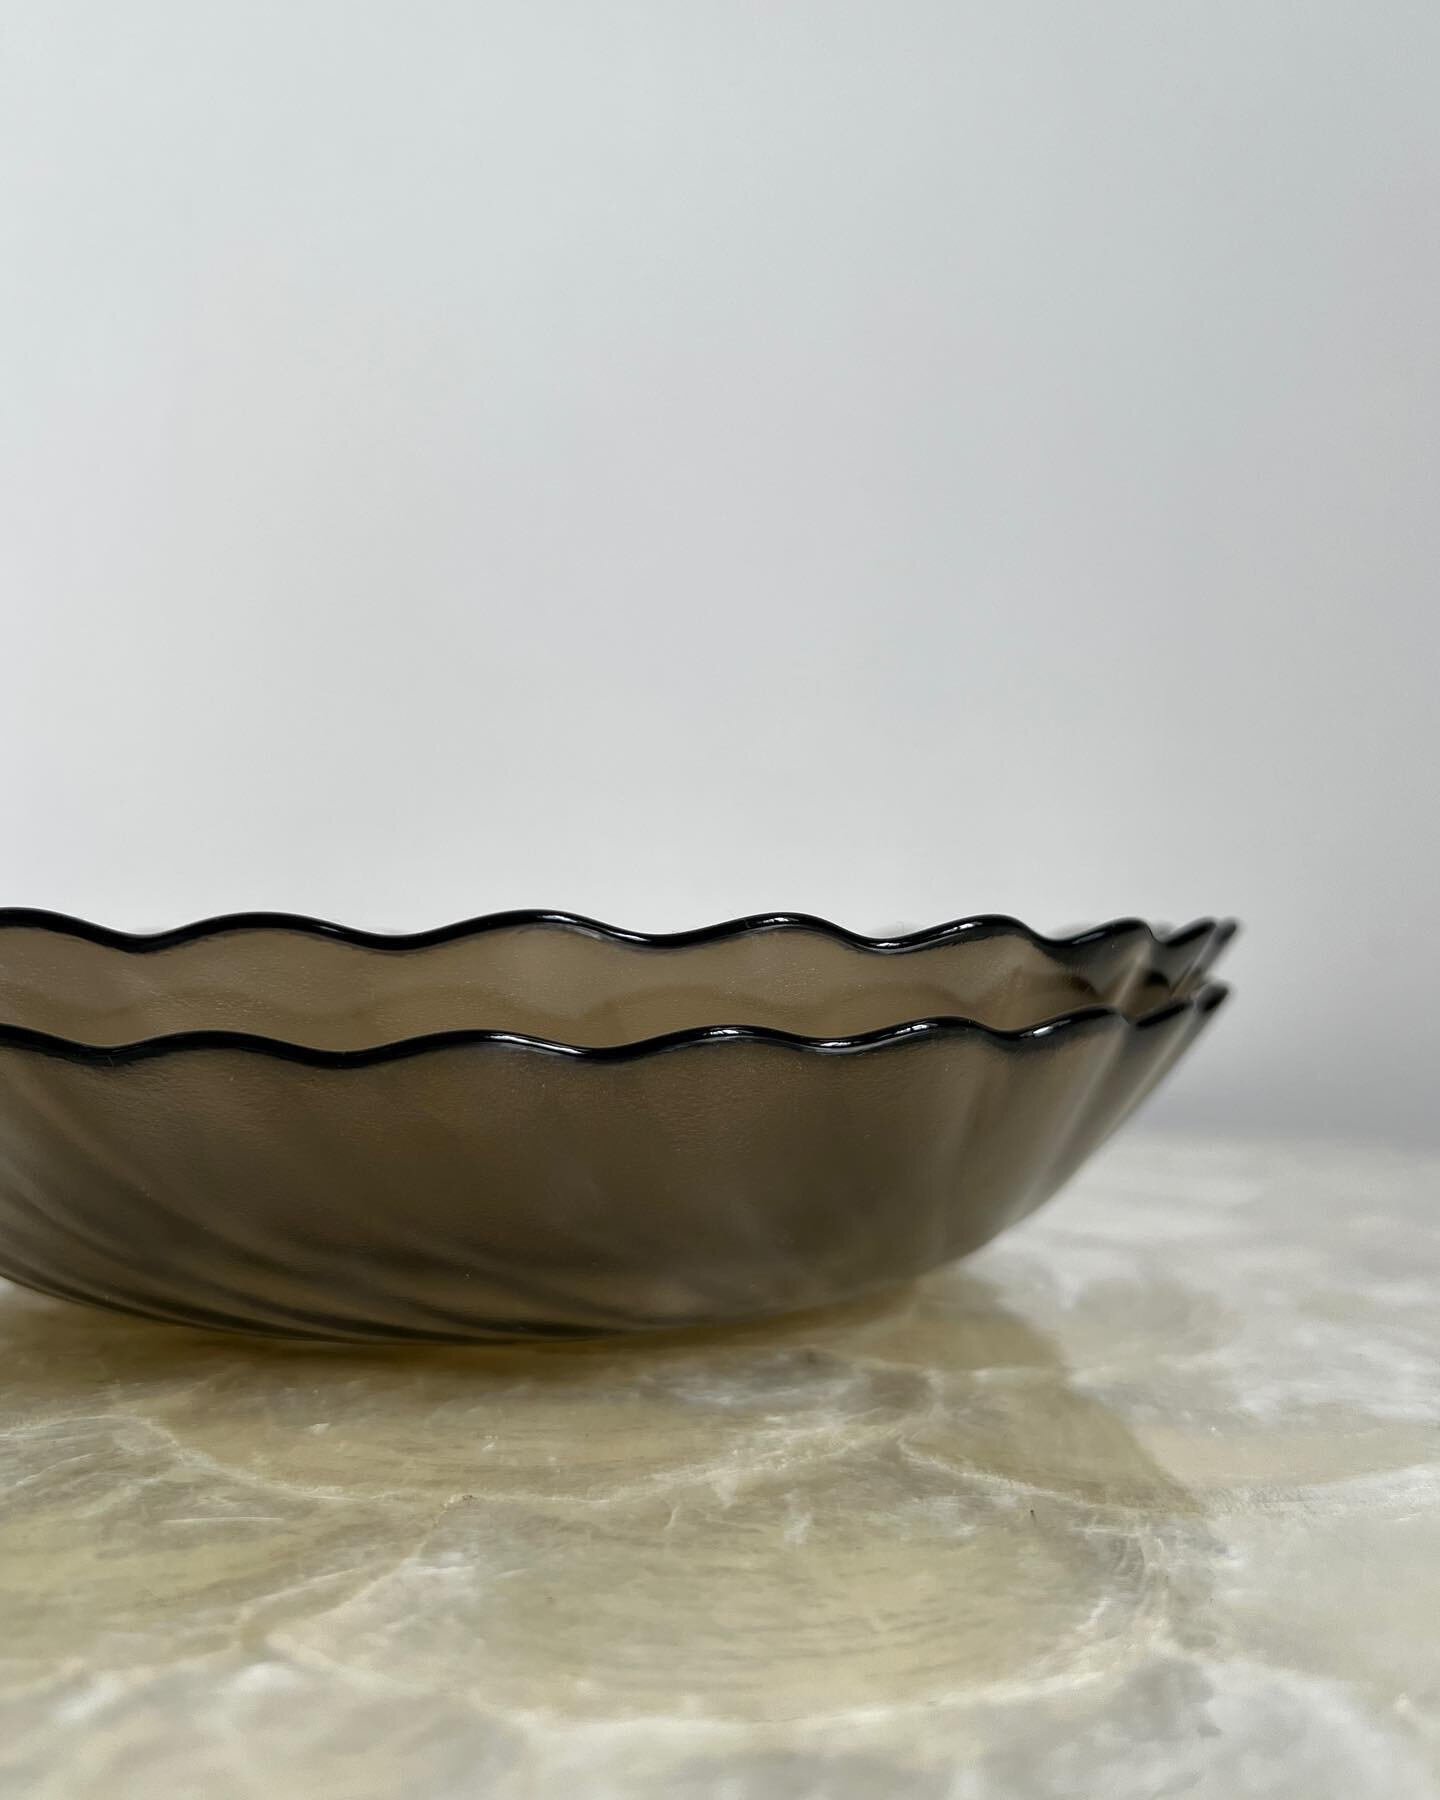 A set of two scallop-edged bowls in smoky glass. The underside of the bowls have a fine texture resulting in a matte finish, while the inside of the bowls have a smooth glossy finish. Not many were produced, making these bowls rare and hard to come b